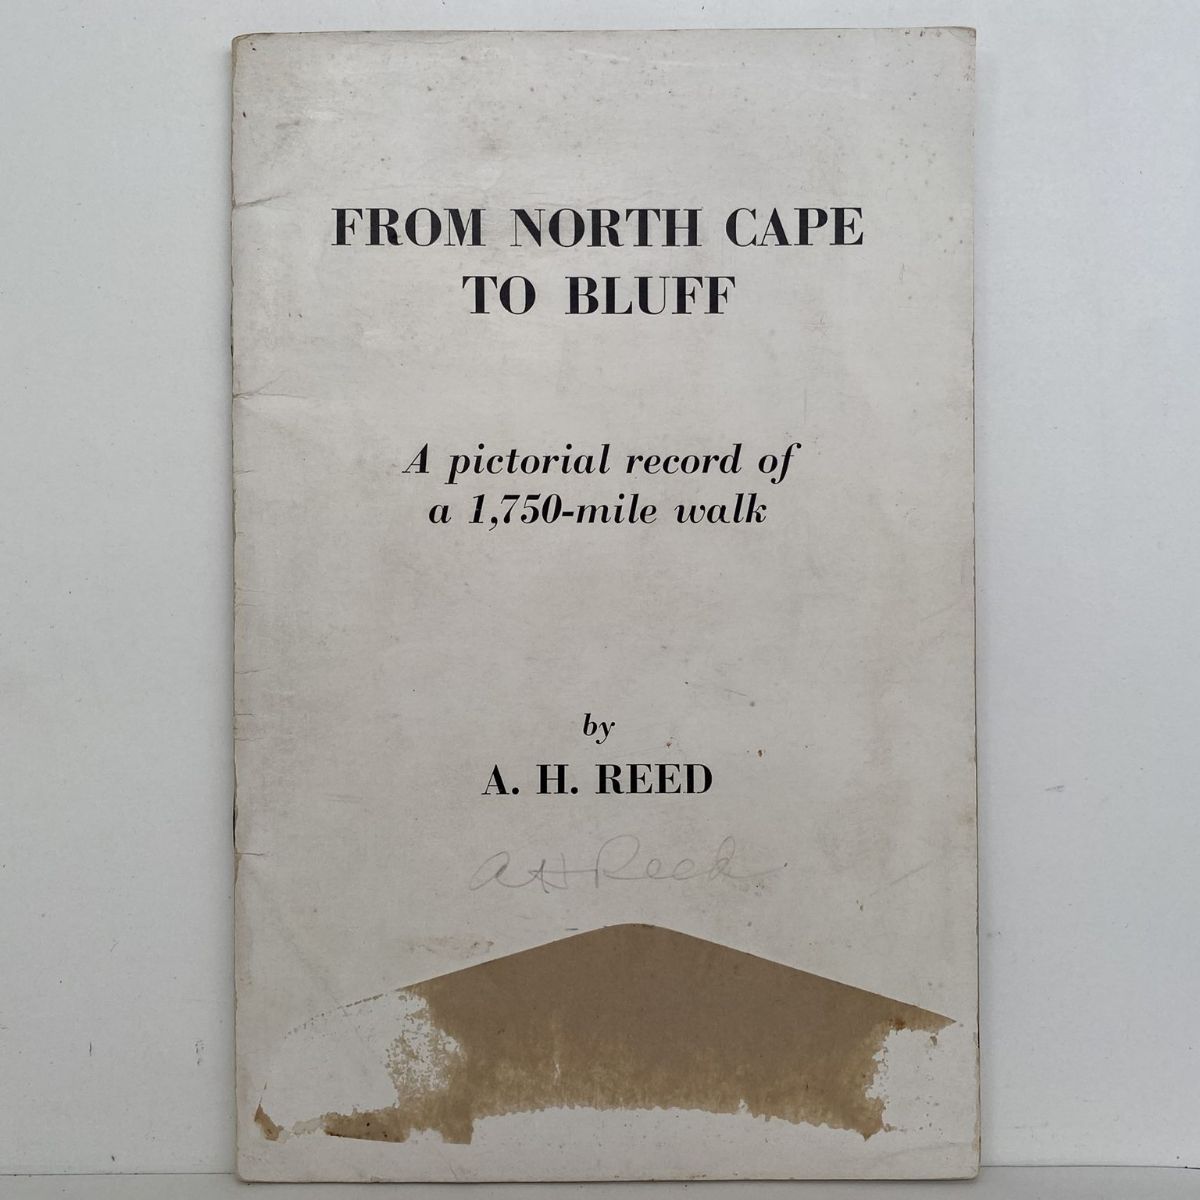 FROM NORTH CAPE TO BLUFF: A Pictorial Record of 1750 mile Walk